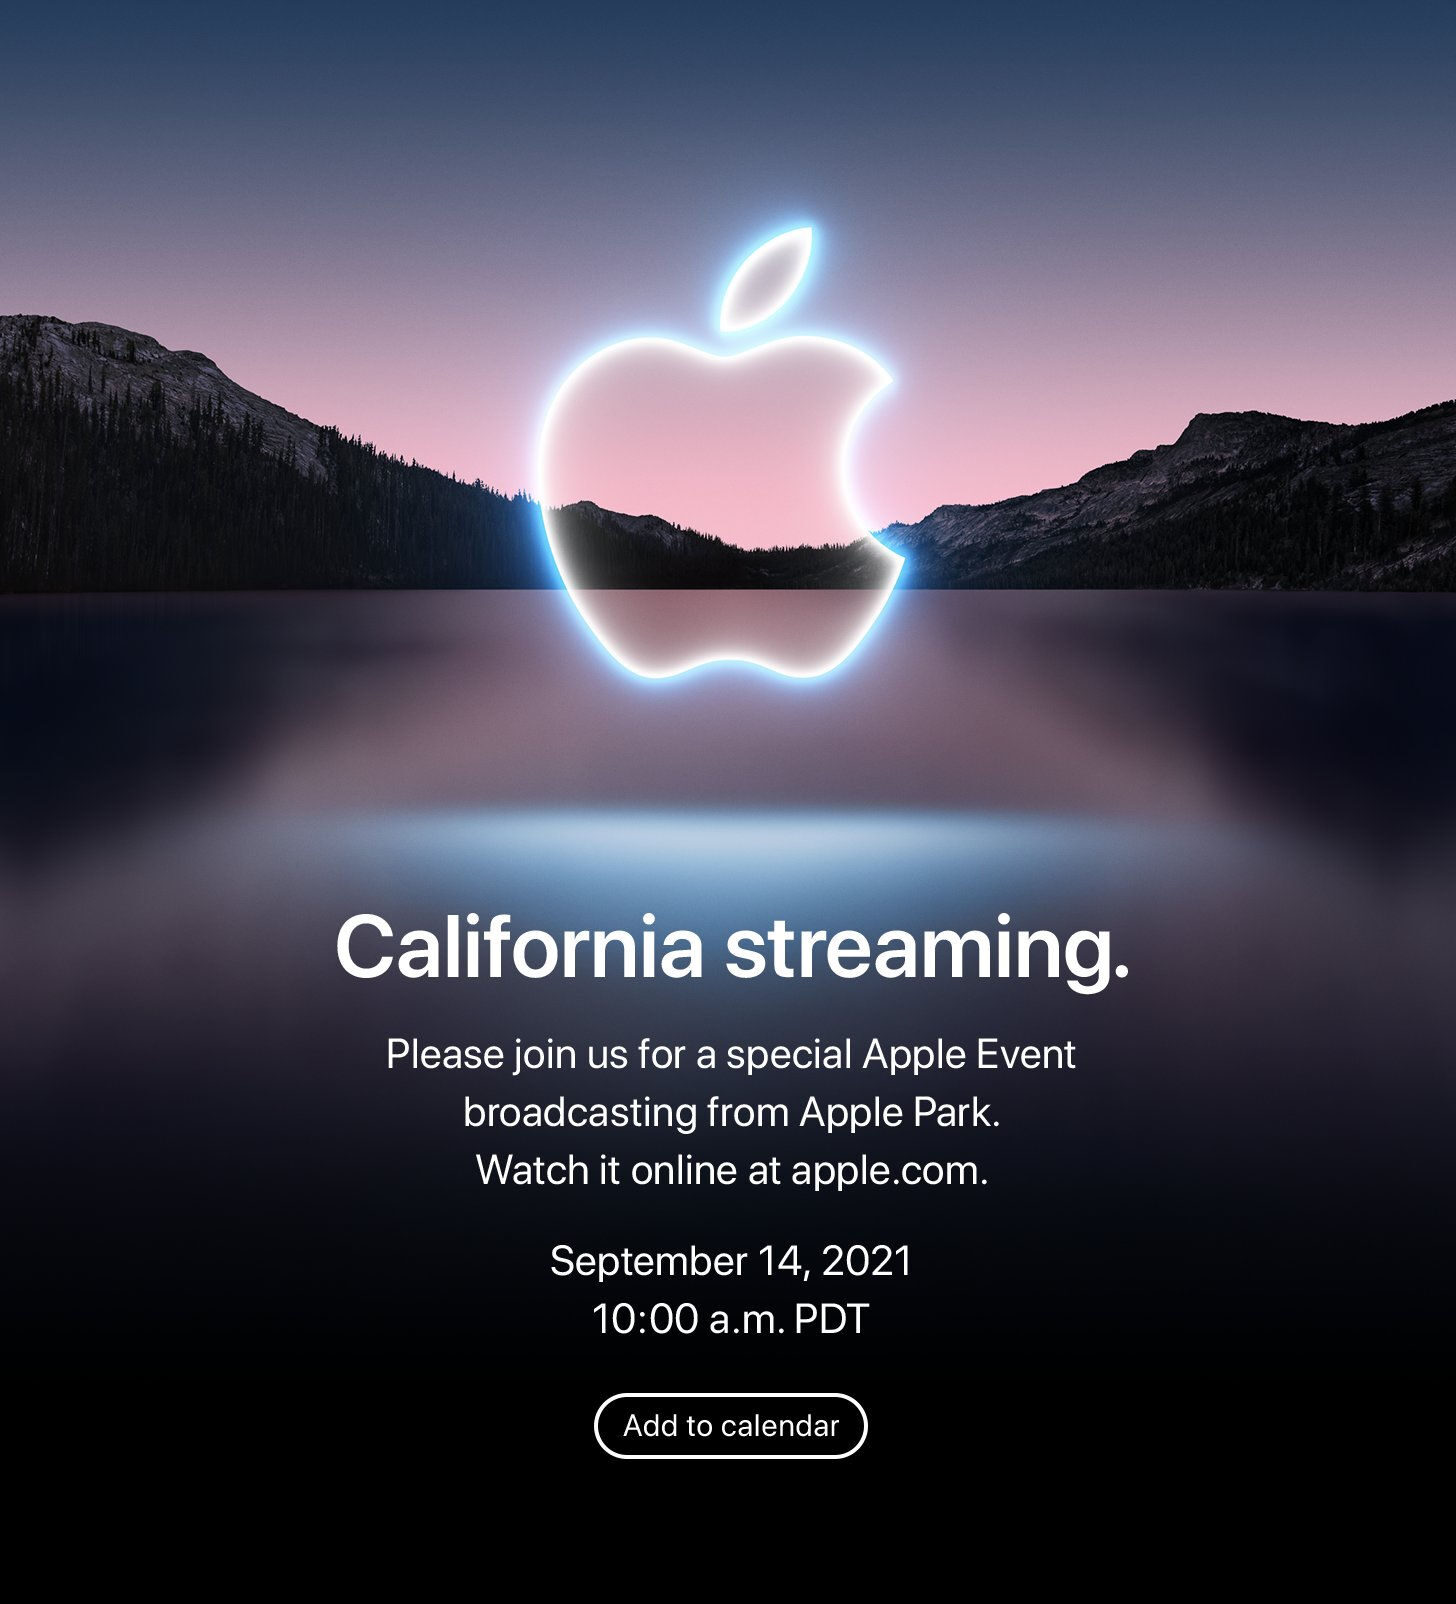 How to watch Apple%27s September 14 California streaming event